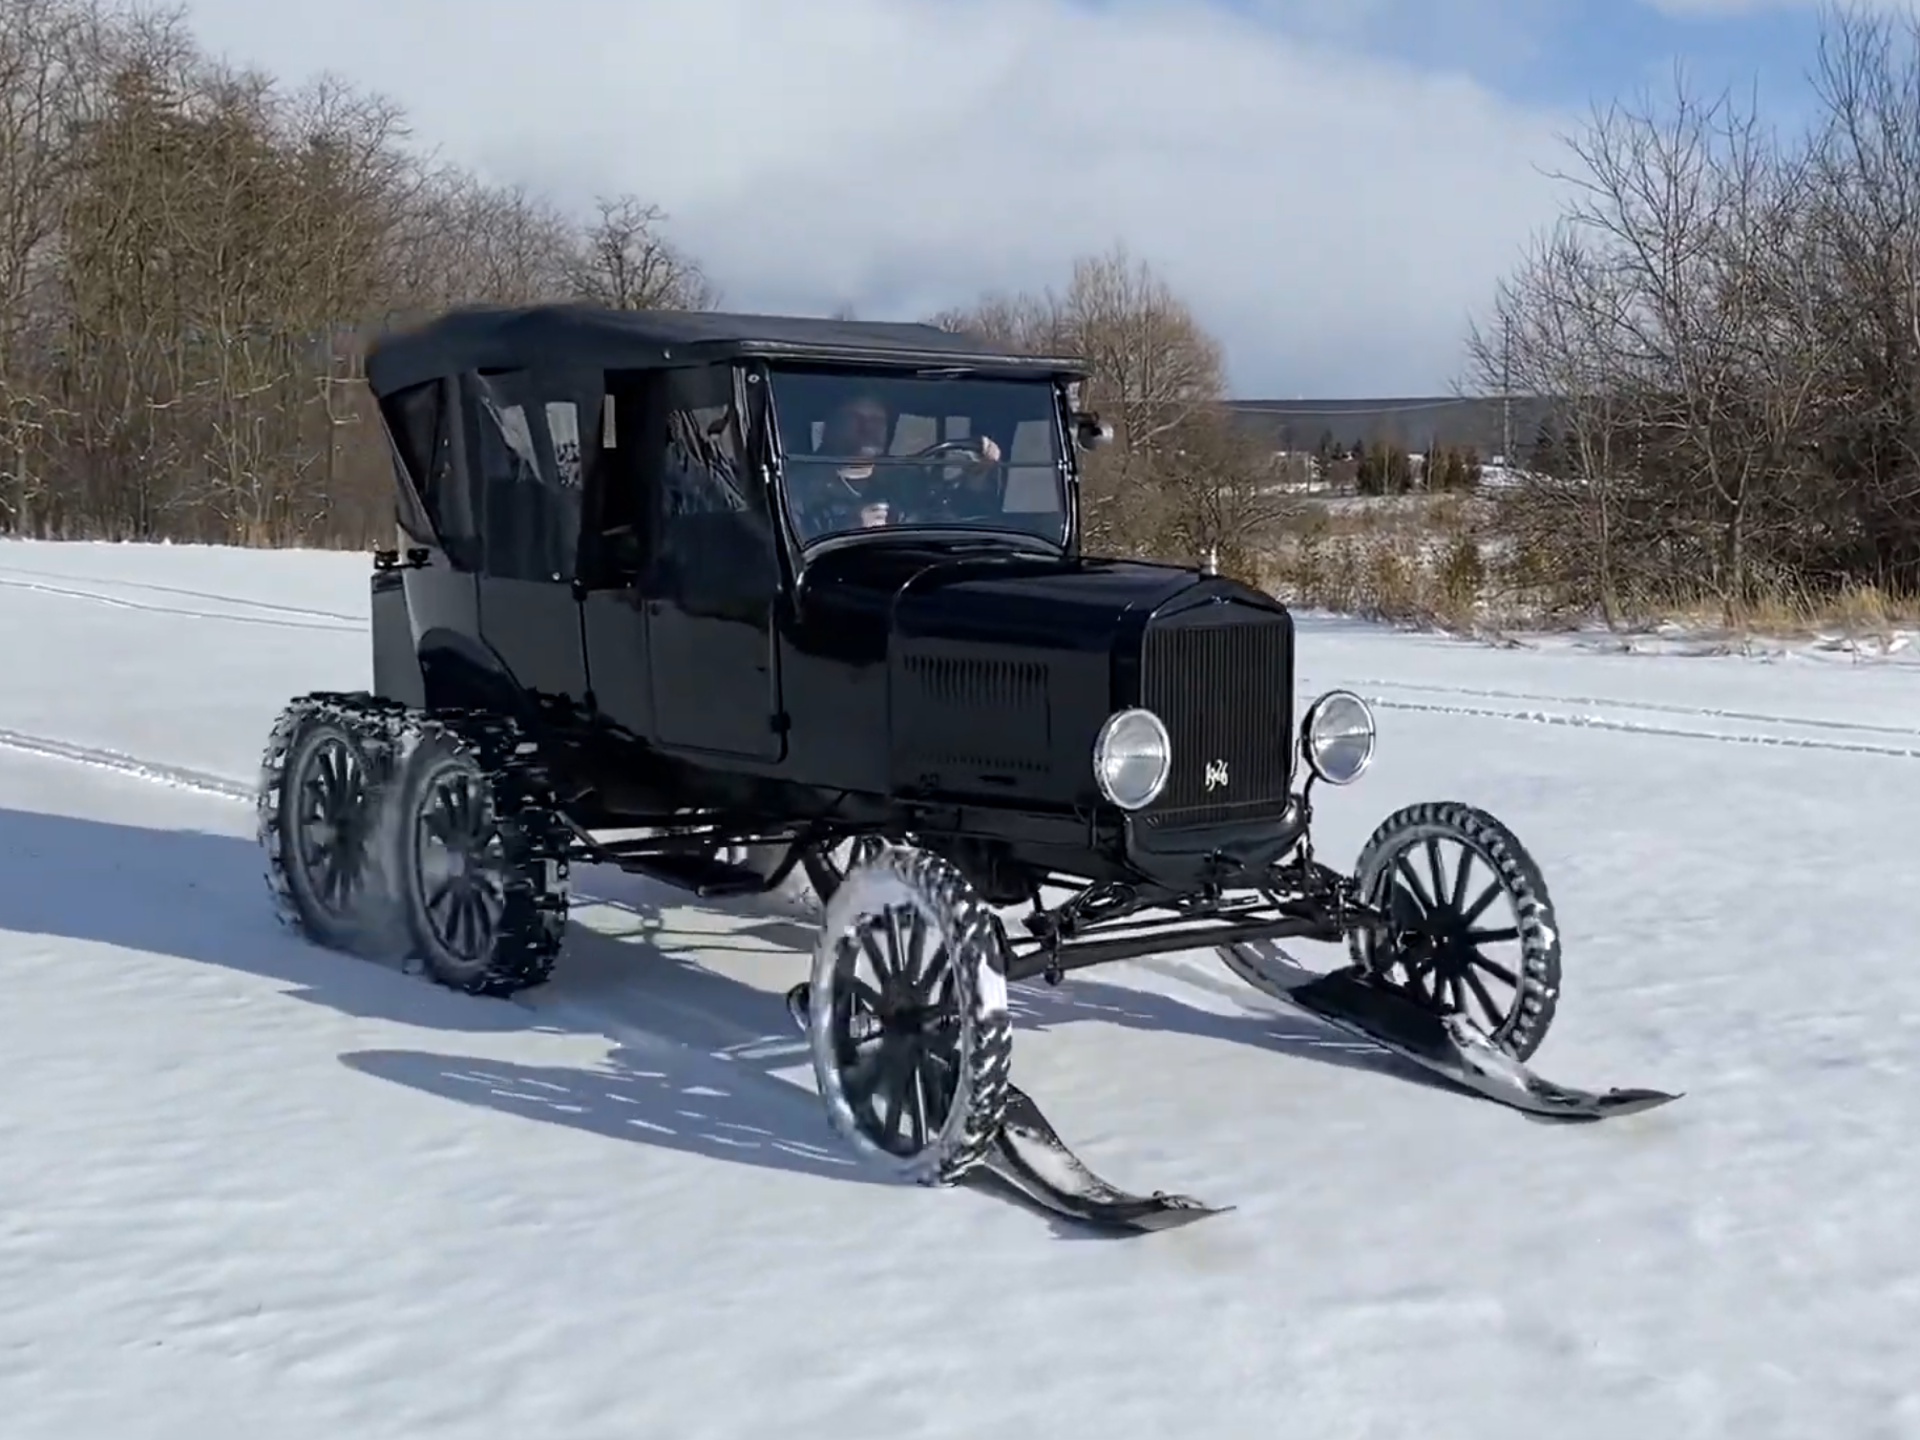 A Ford Dealer Made This Incredible Three-Axle Snowmobile Conversion Kit for  Model Ts